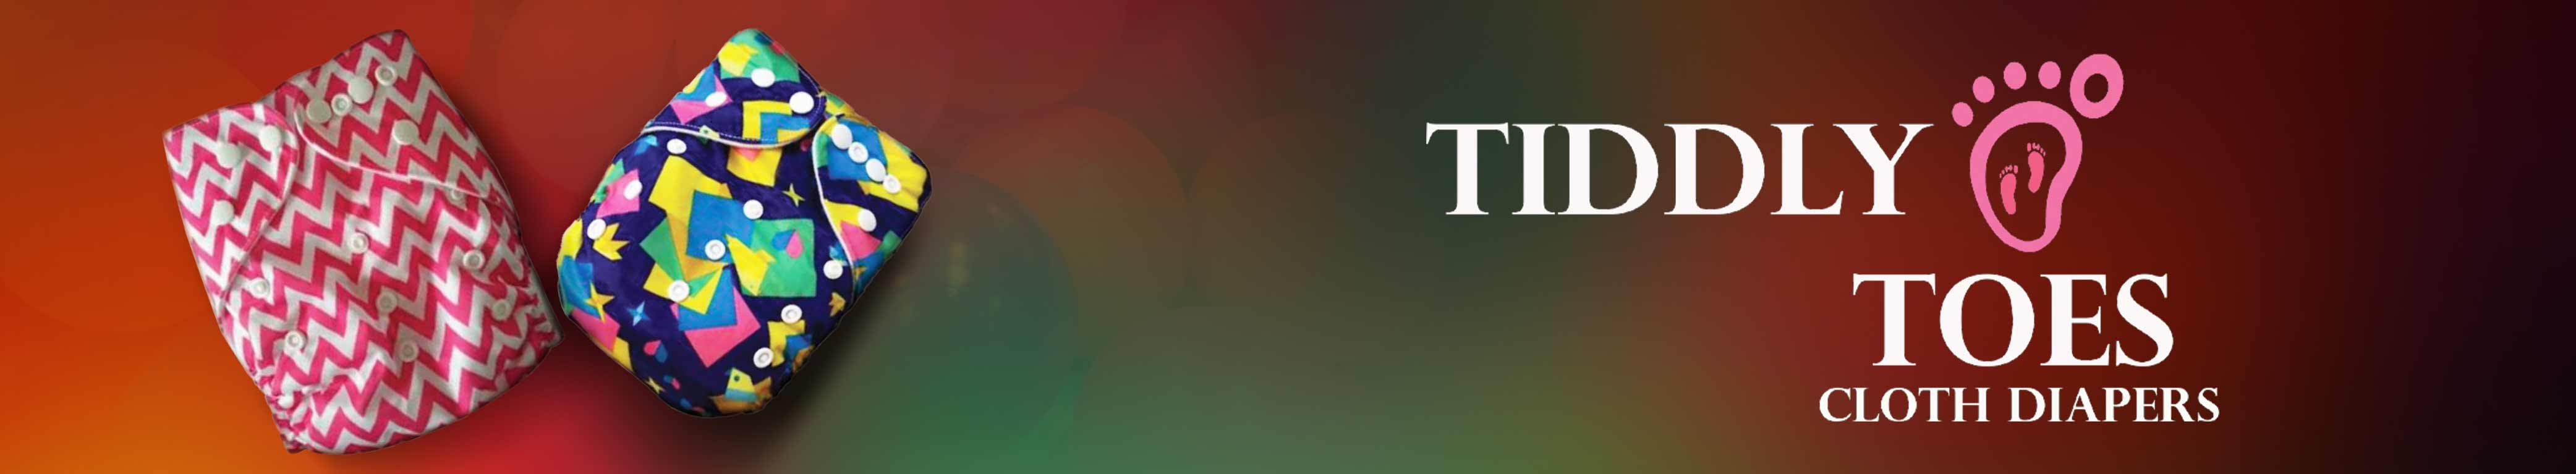 Tiddly Toes Banner Image